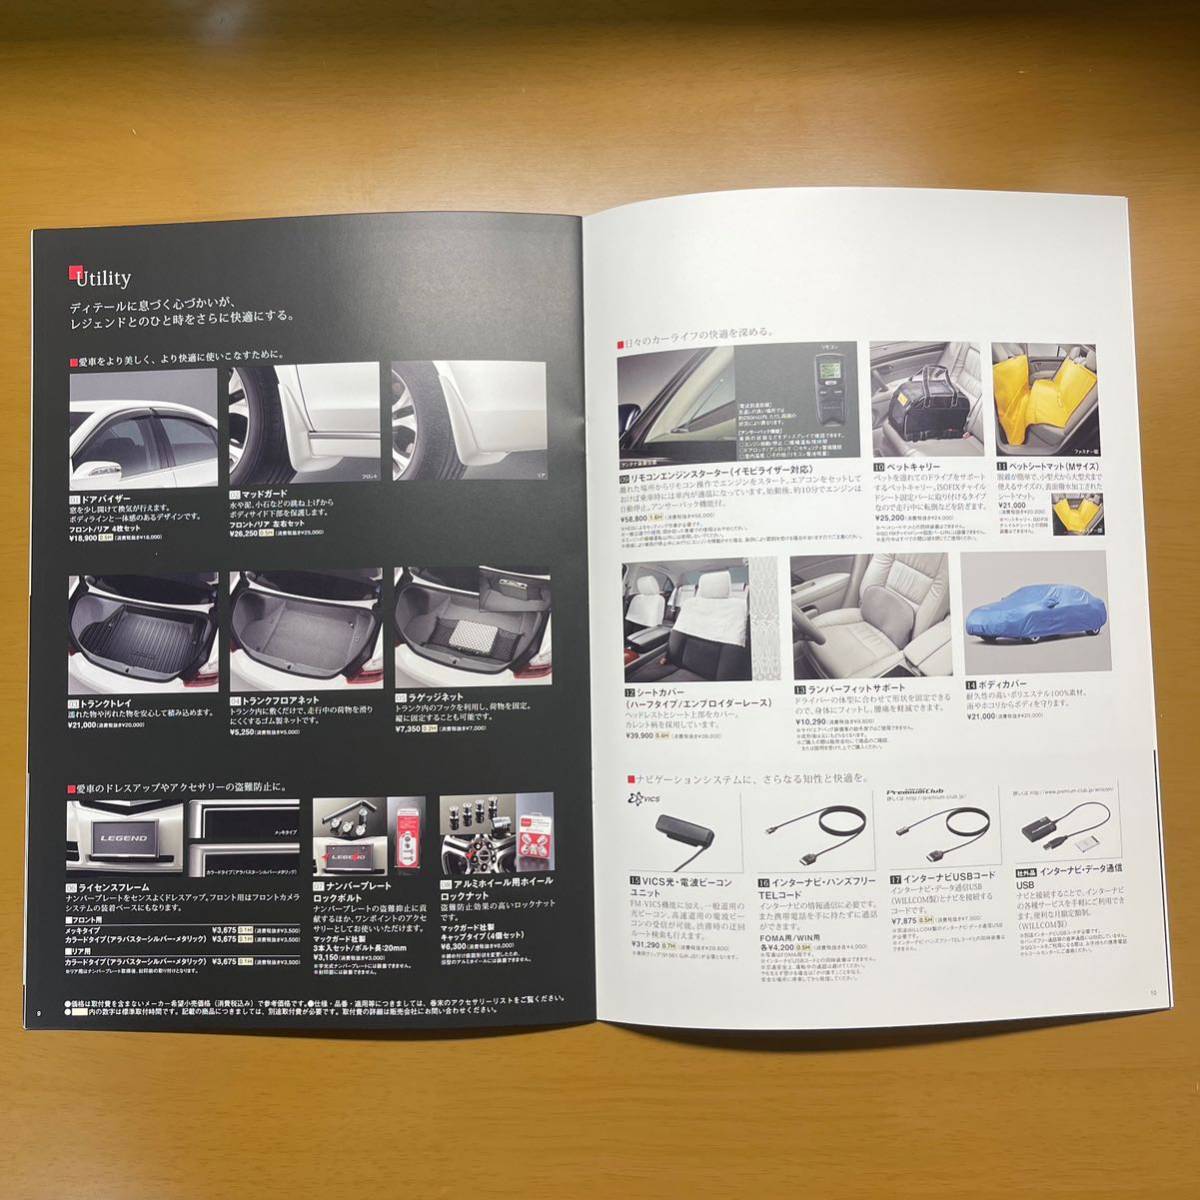  Honda Legend 2008 year 9 month accessory catalog 14P prompt decision free shipping!!